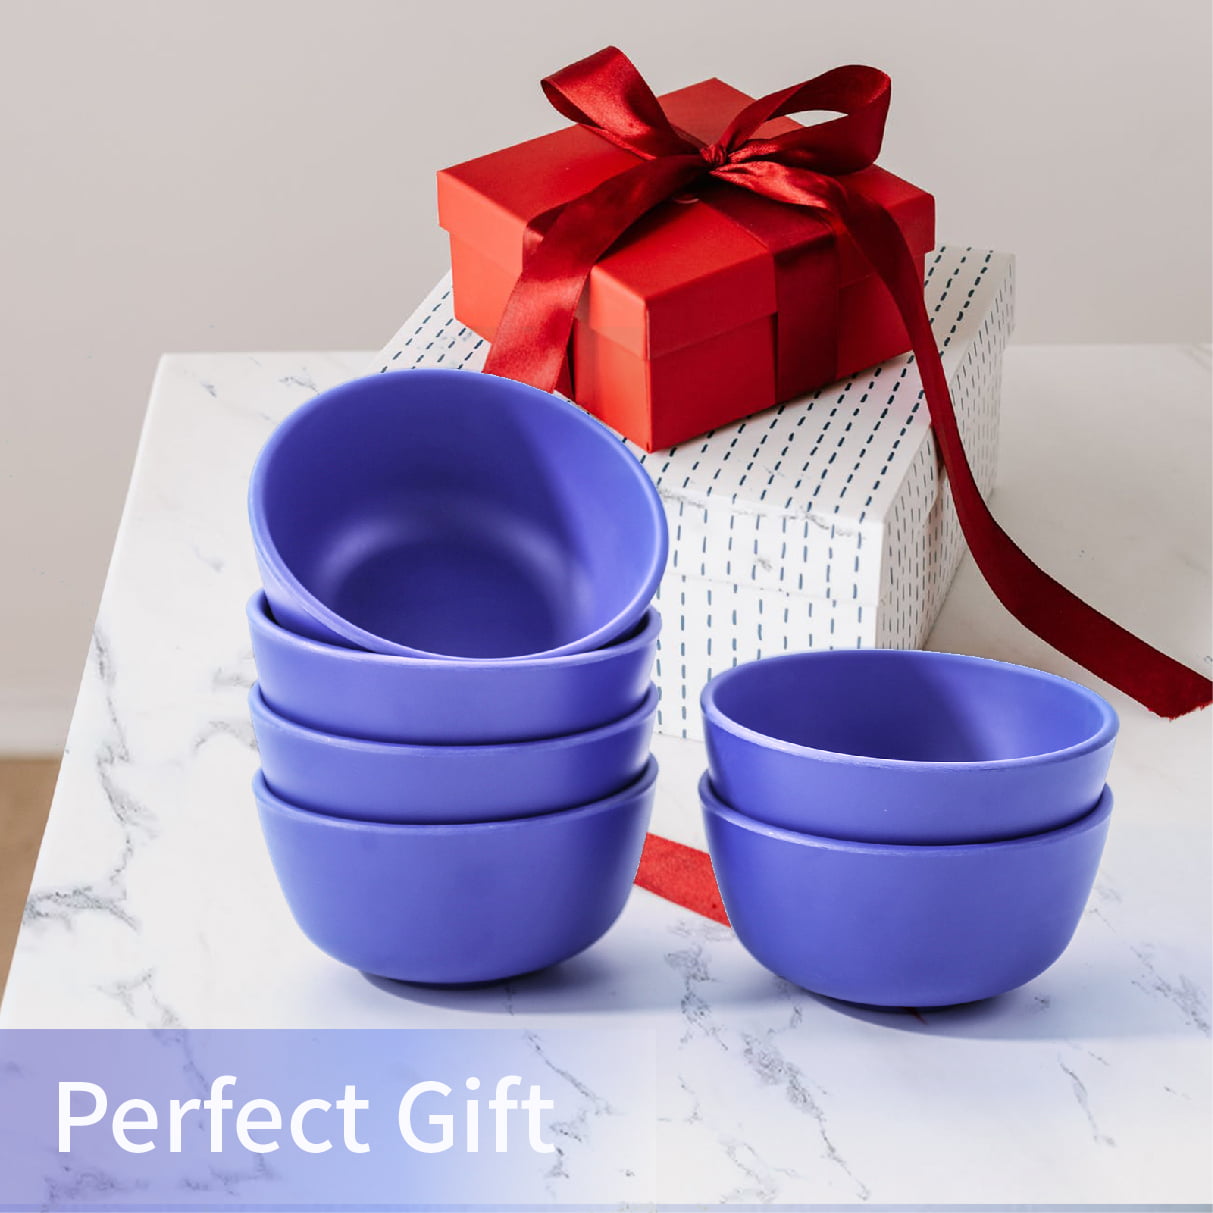 Costco's Colorful Melamine Bowl Set Is A Total Steal